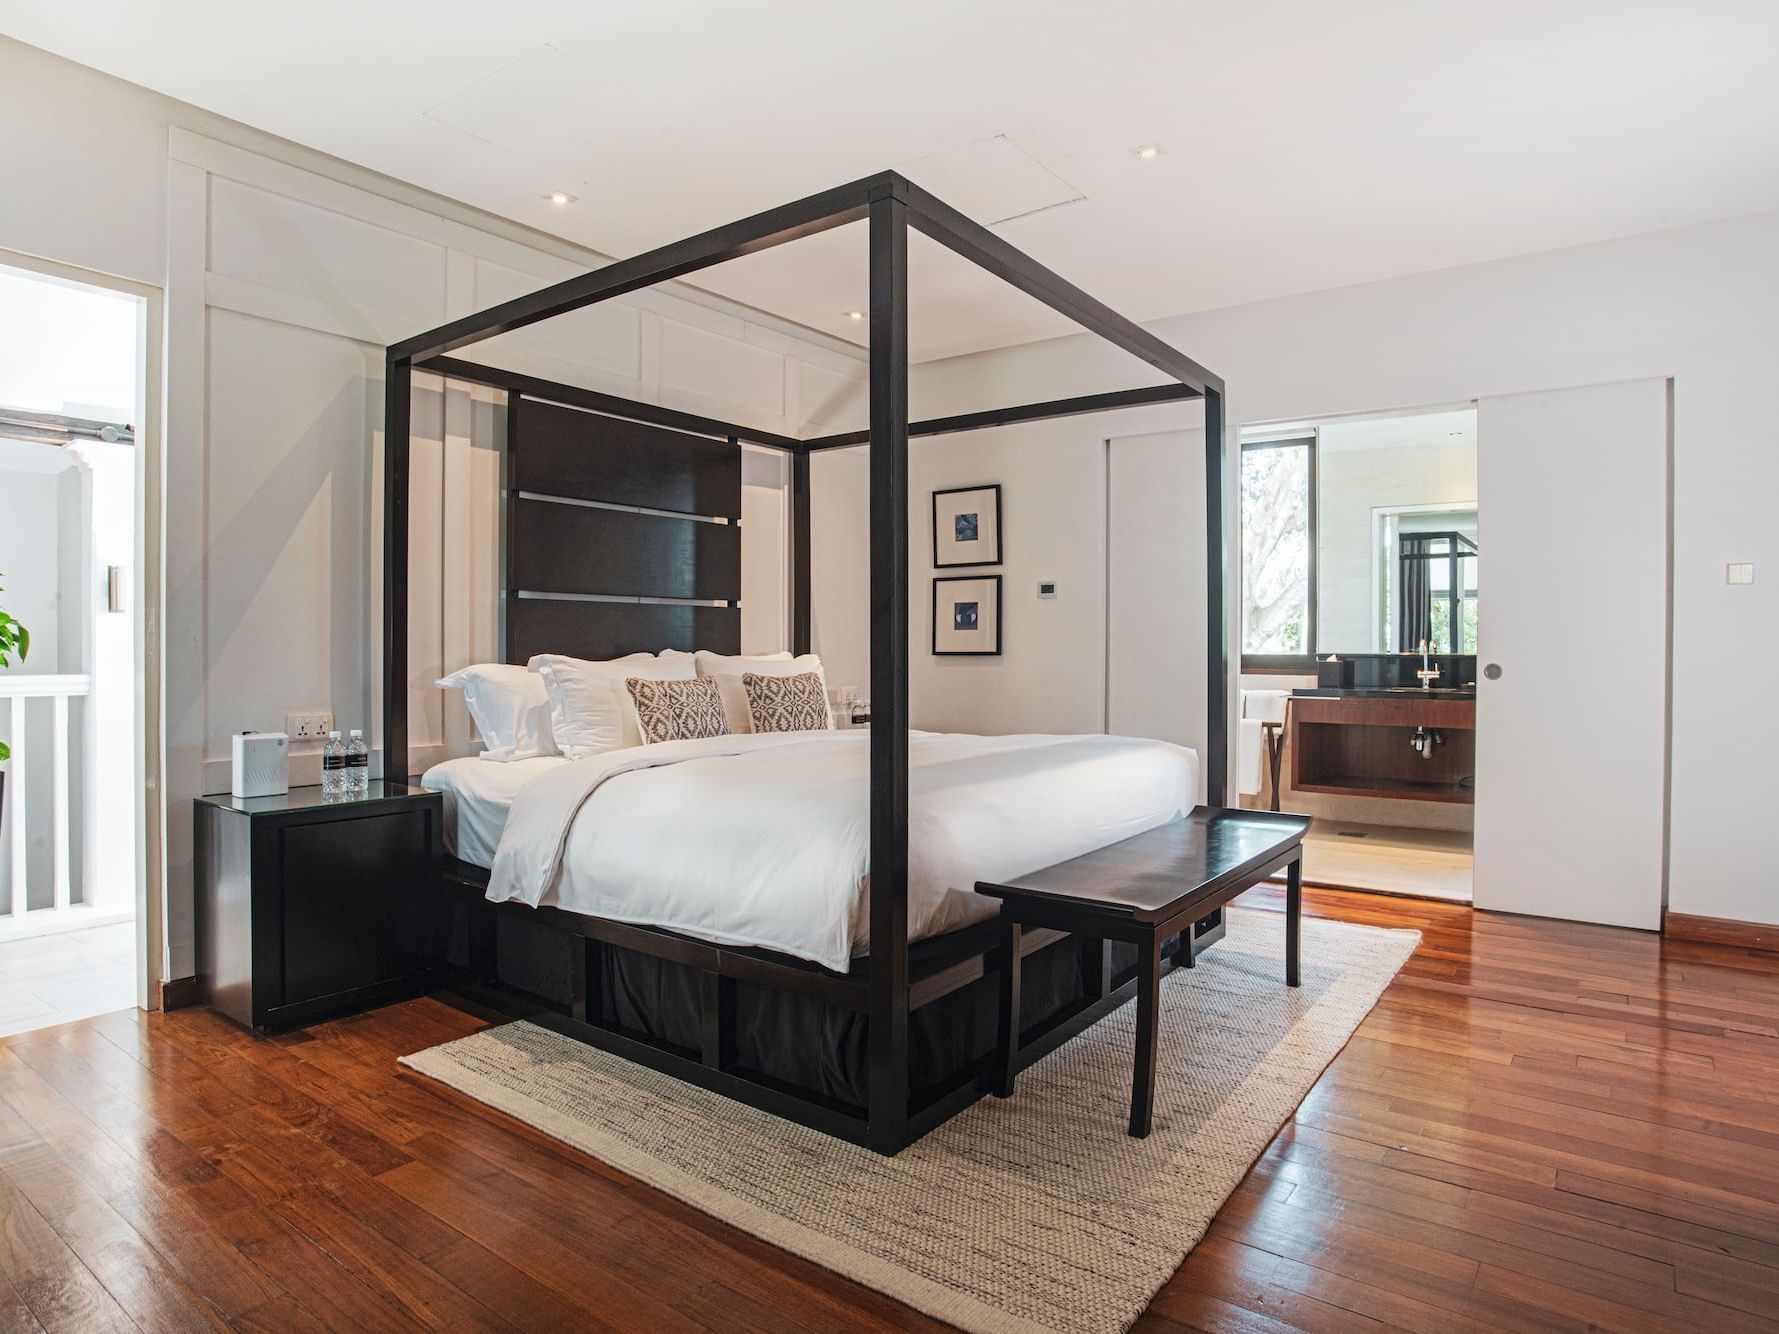 A spacious bedroom with a charming four-poster bed